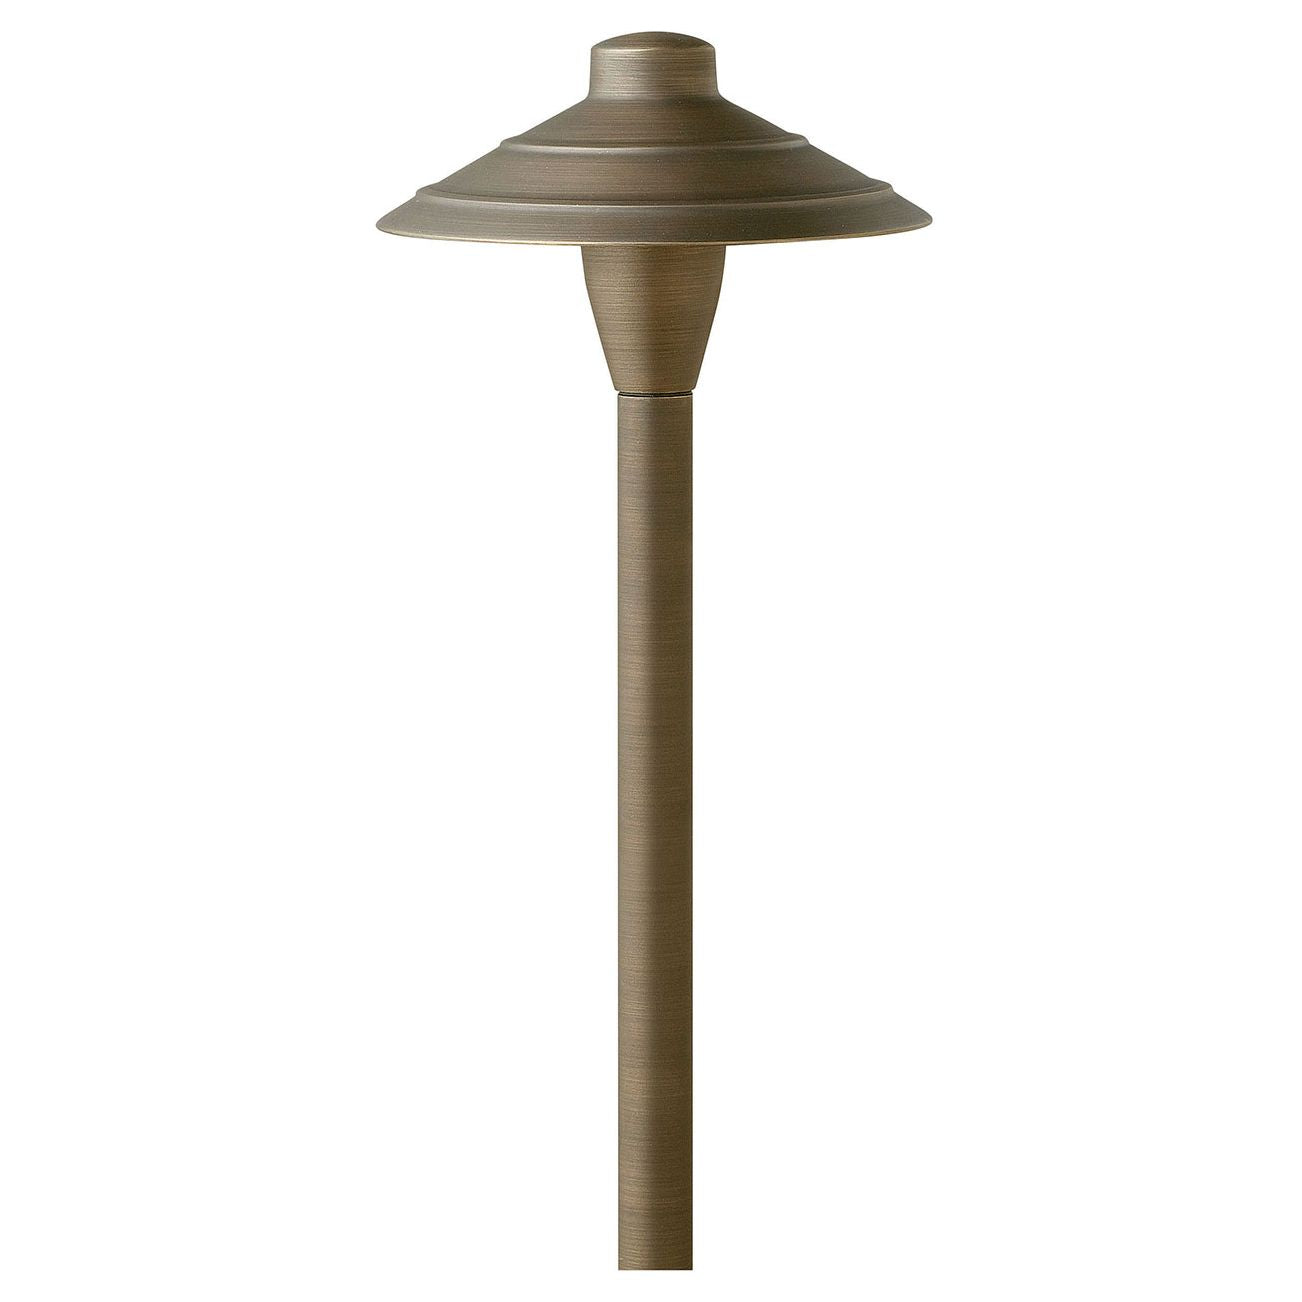 Hinkley 16004MZ-LL-Hardy Island 7" Wide Single Light Small Traditional LED Path Light Landscape in M